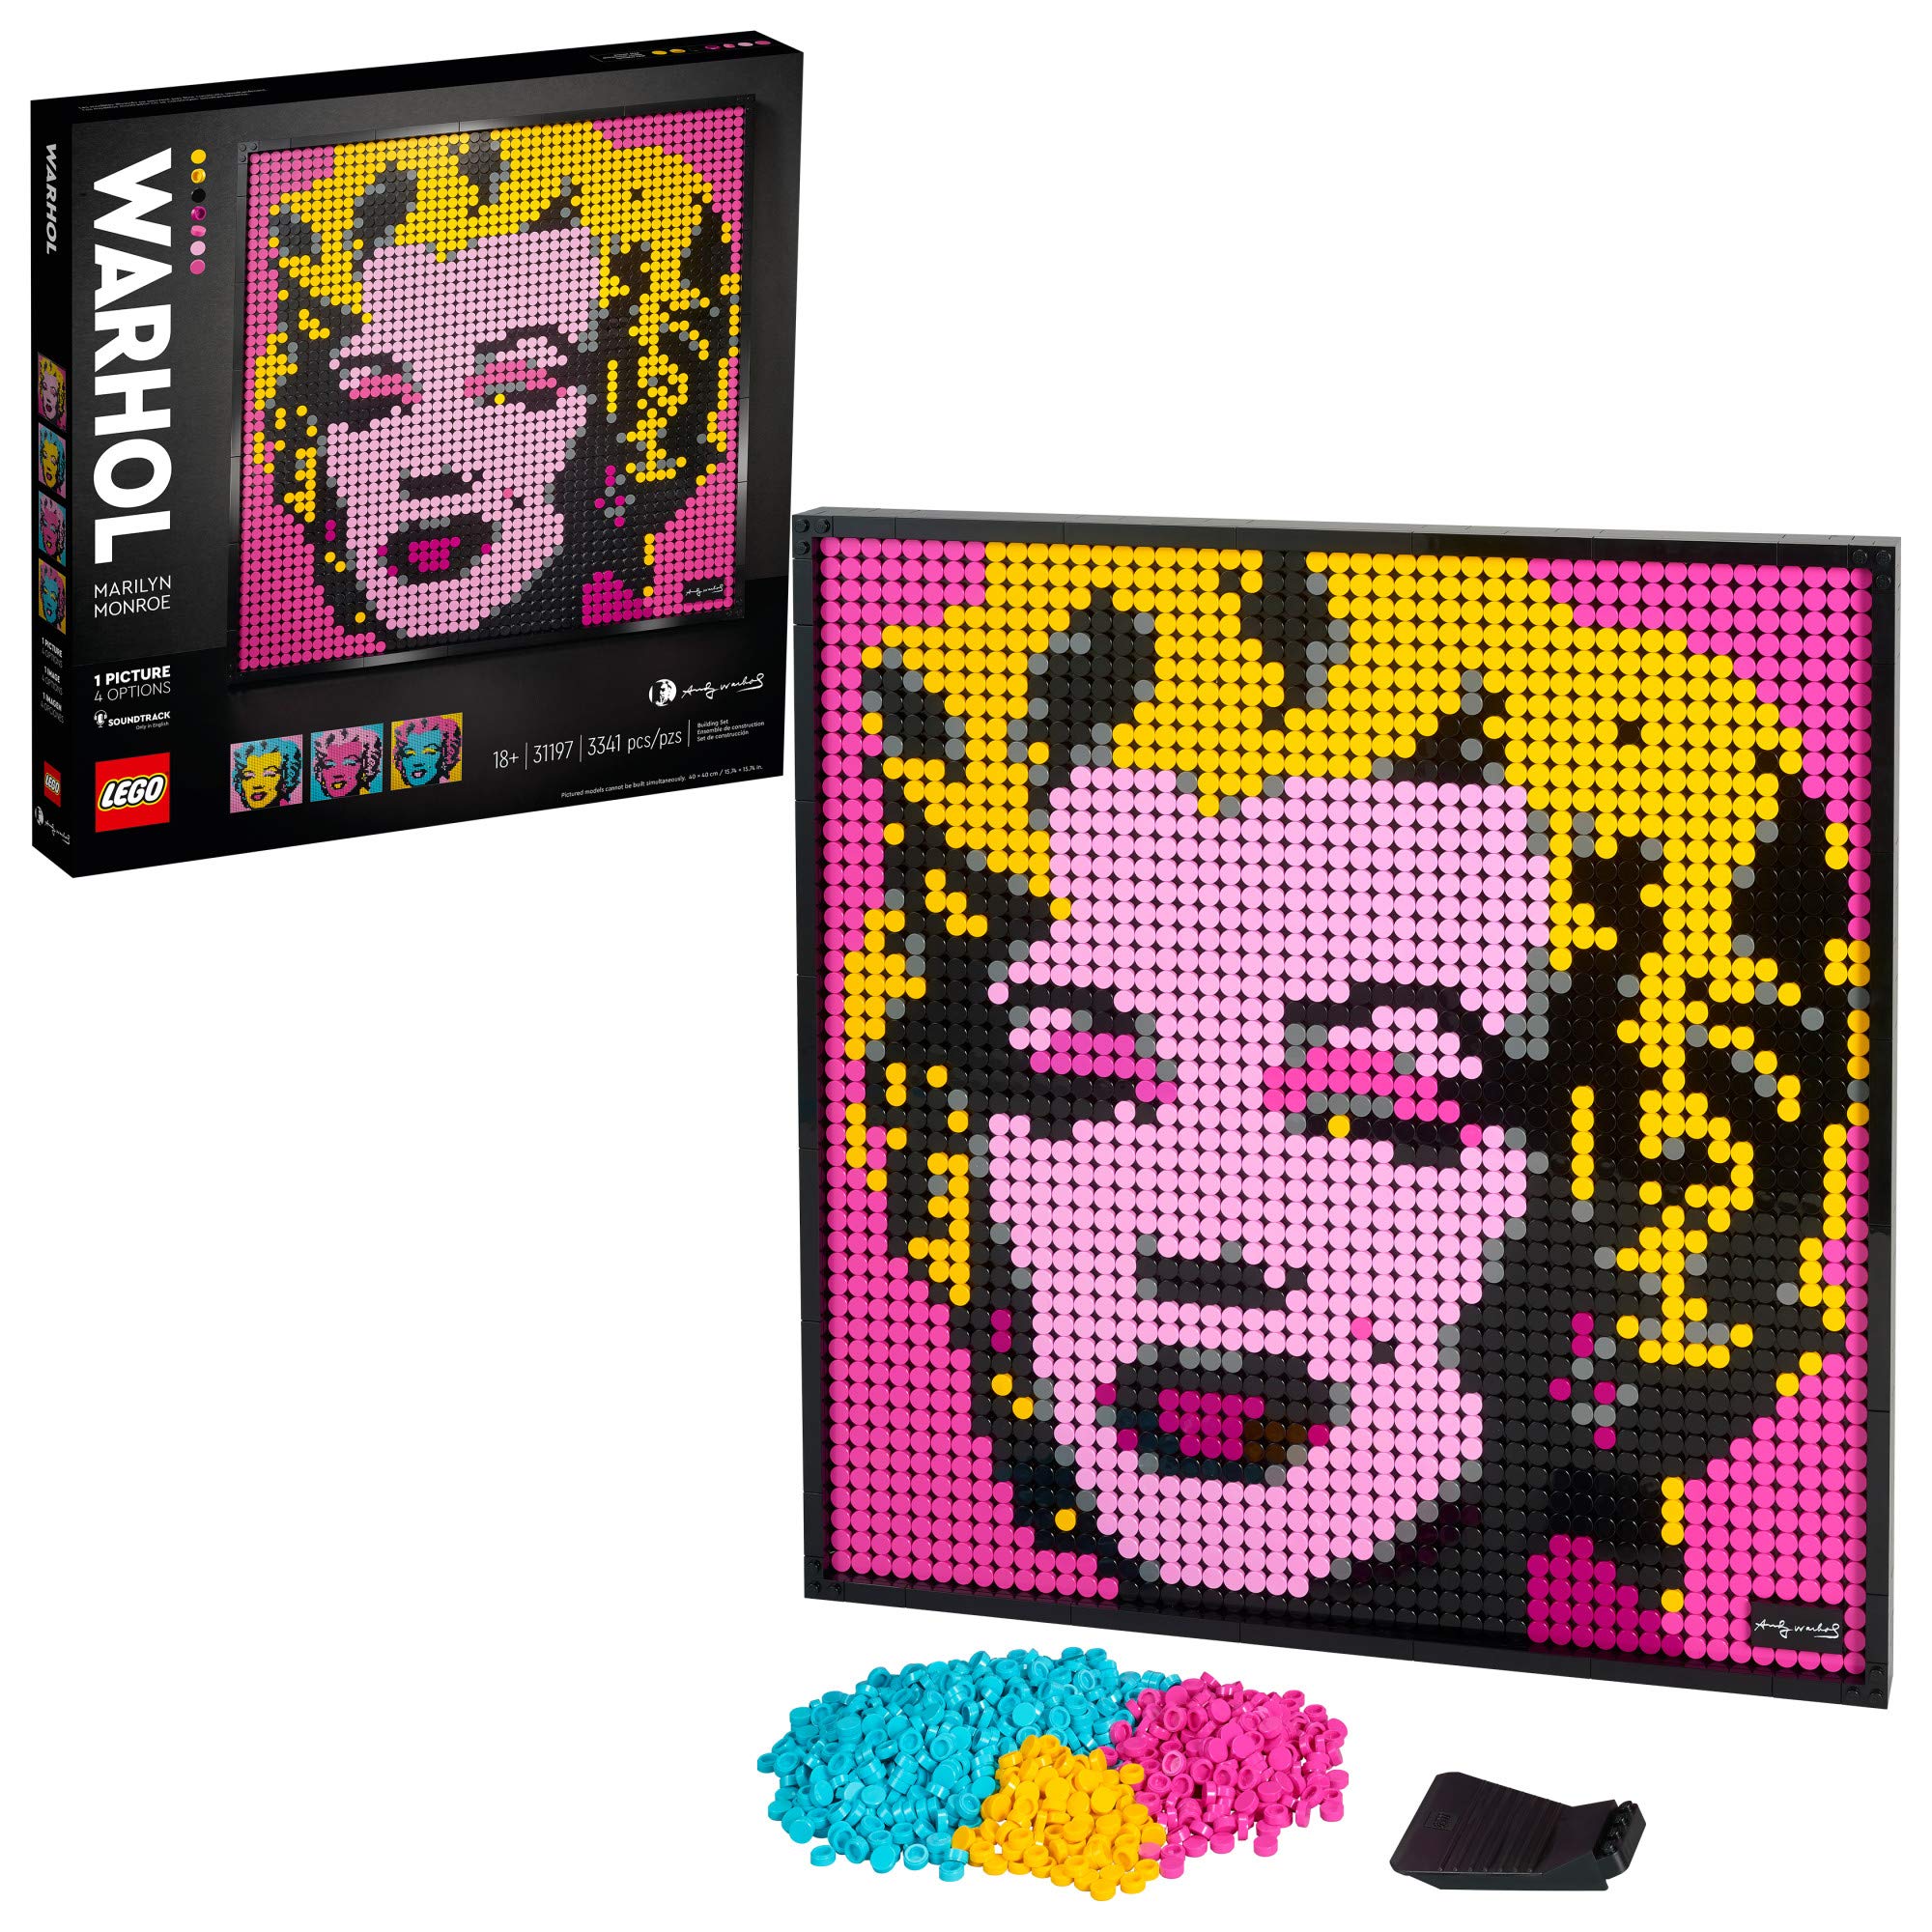 LEGO Art Andy Warhol’s Marilyn Monroe 31197 Collectible Building Kit for Adults; an Excellent Gift for Adults to Make Stunning Wall Art at Home and Who Love Creative Building (3,341 Pieces)